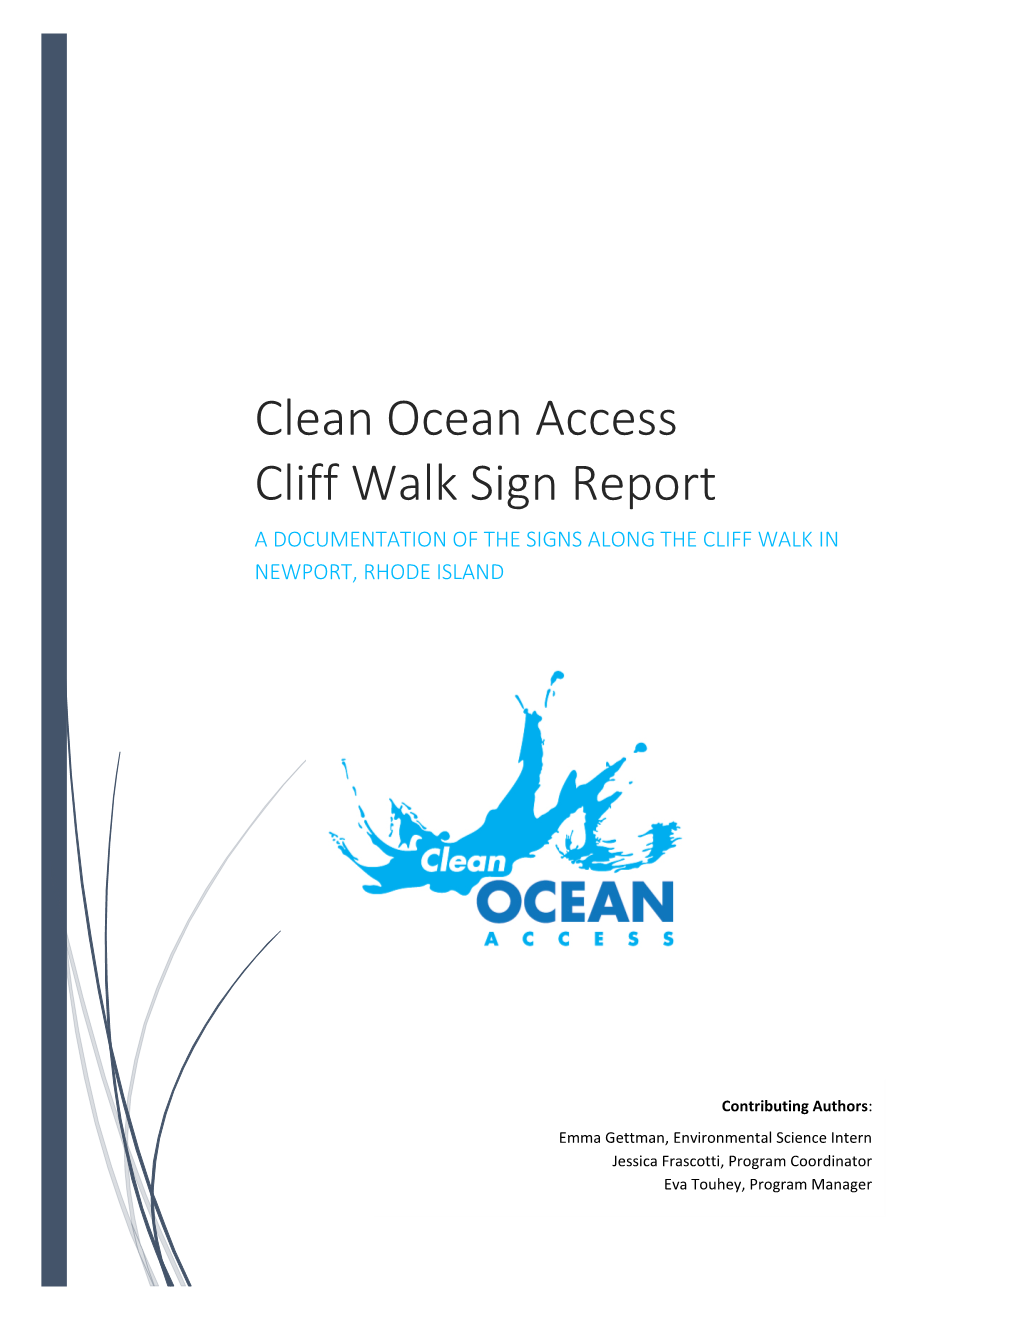 Clean Ocean Access Cliff Walk Sign Report a DOCUMENTATION of the SIGNS ALONG the CLIFF WALK in NEWPORT, RHODE ISLAND